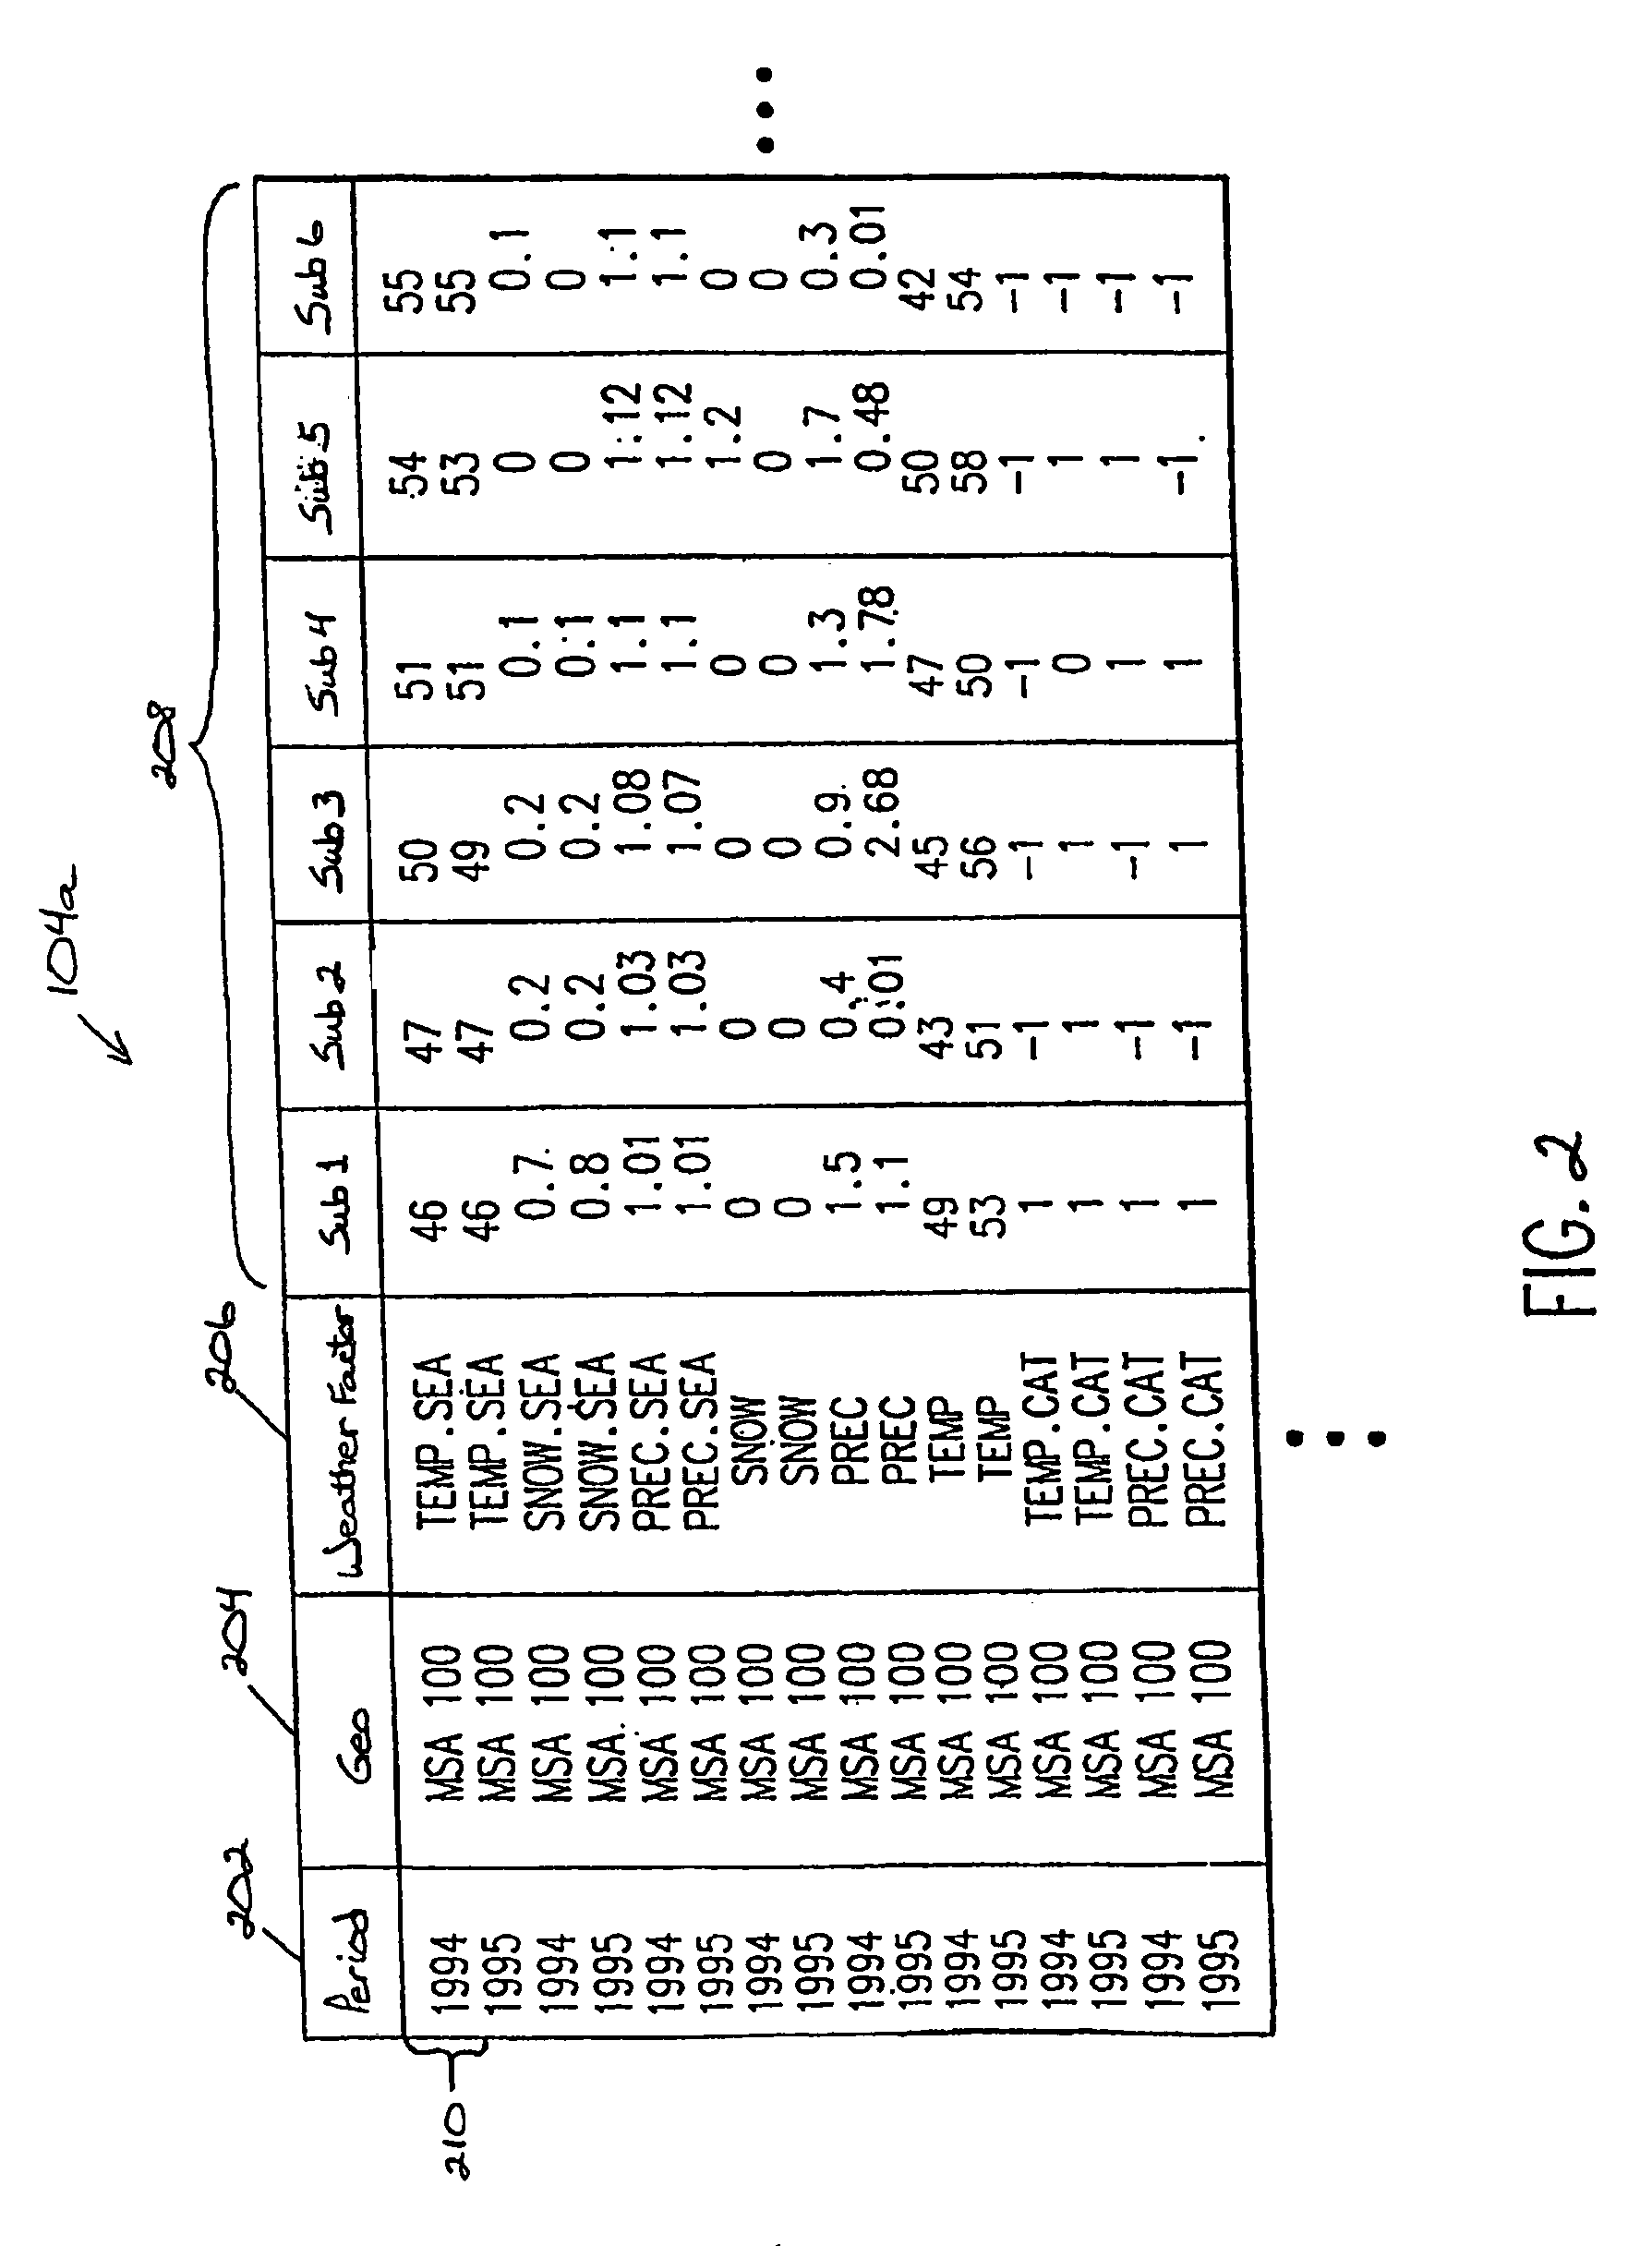 System, method, and computer program product for predicting a weather-based financial index value